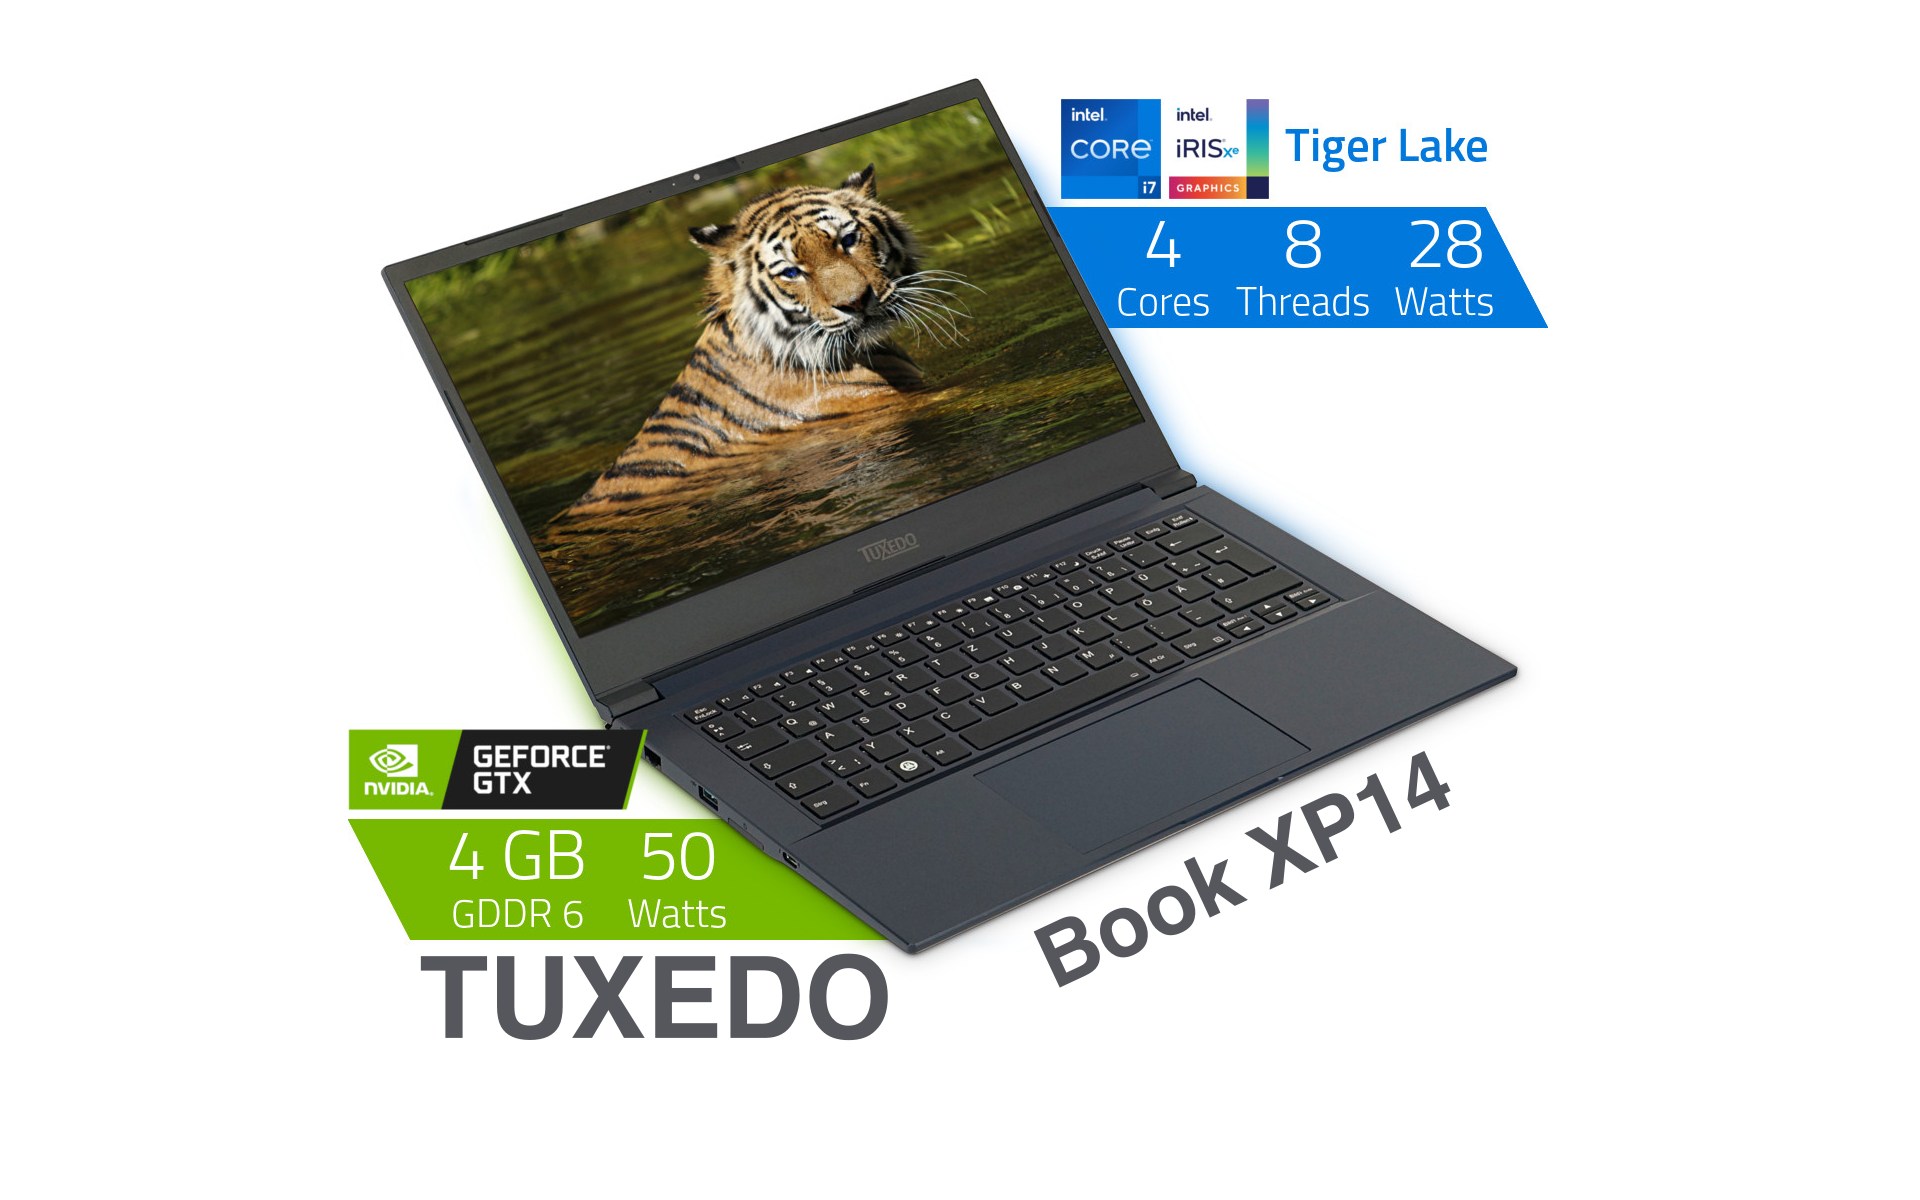 TUXEDO Book XP14 Linux Laptop Available for Pre-Order with Intel Tiger Lake, NVIDIA GTX 1650